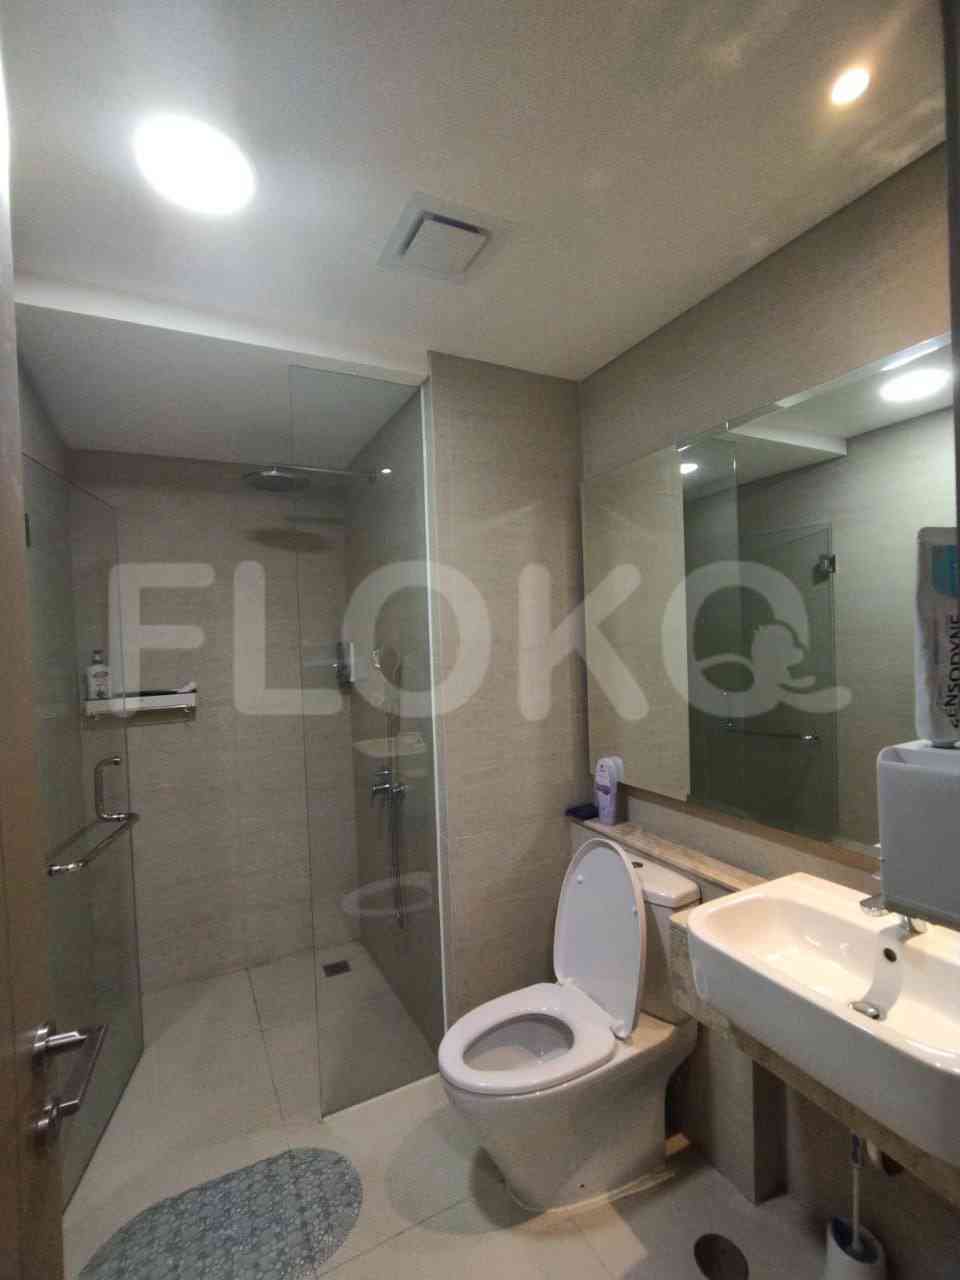 3 Bedroom on 25th Floor for Rent in Gold Coast Apartment - fka079 11